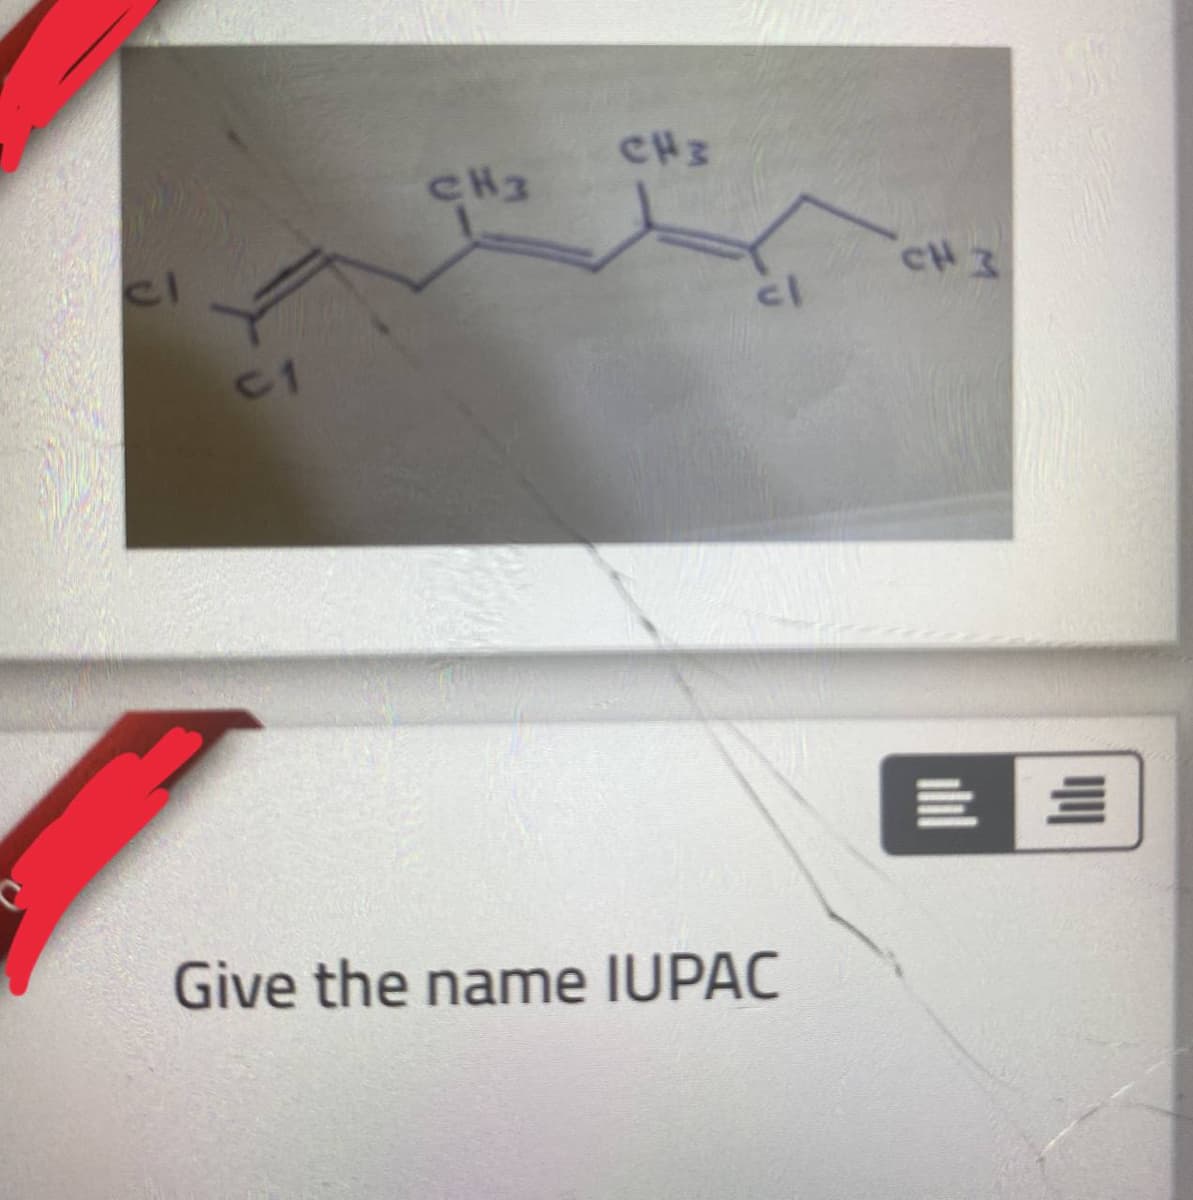 CH3
CH3
CH 3
C1
三三
Give the name IUPAC
